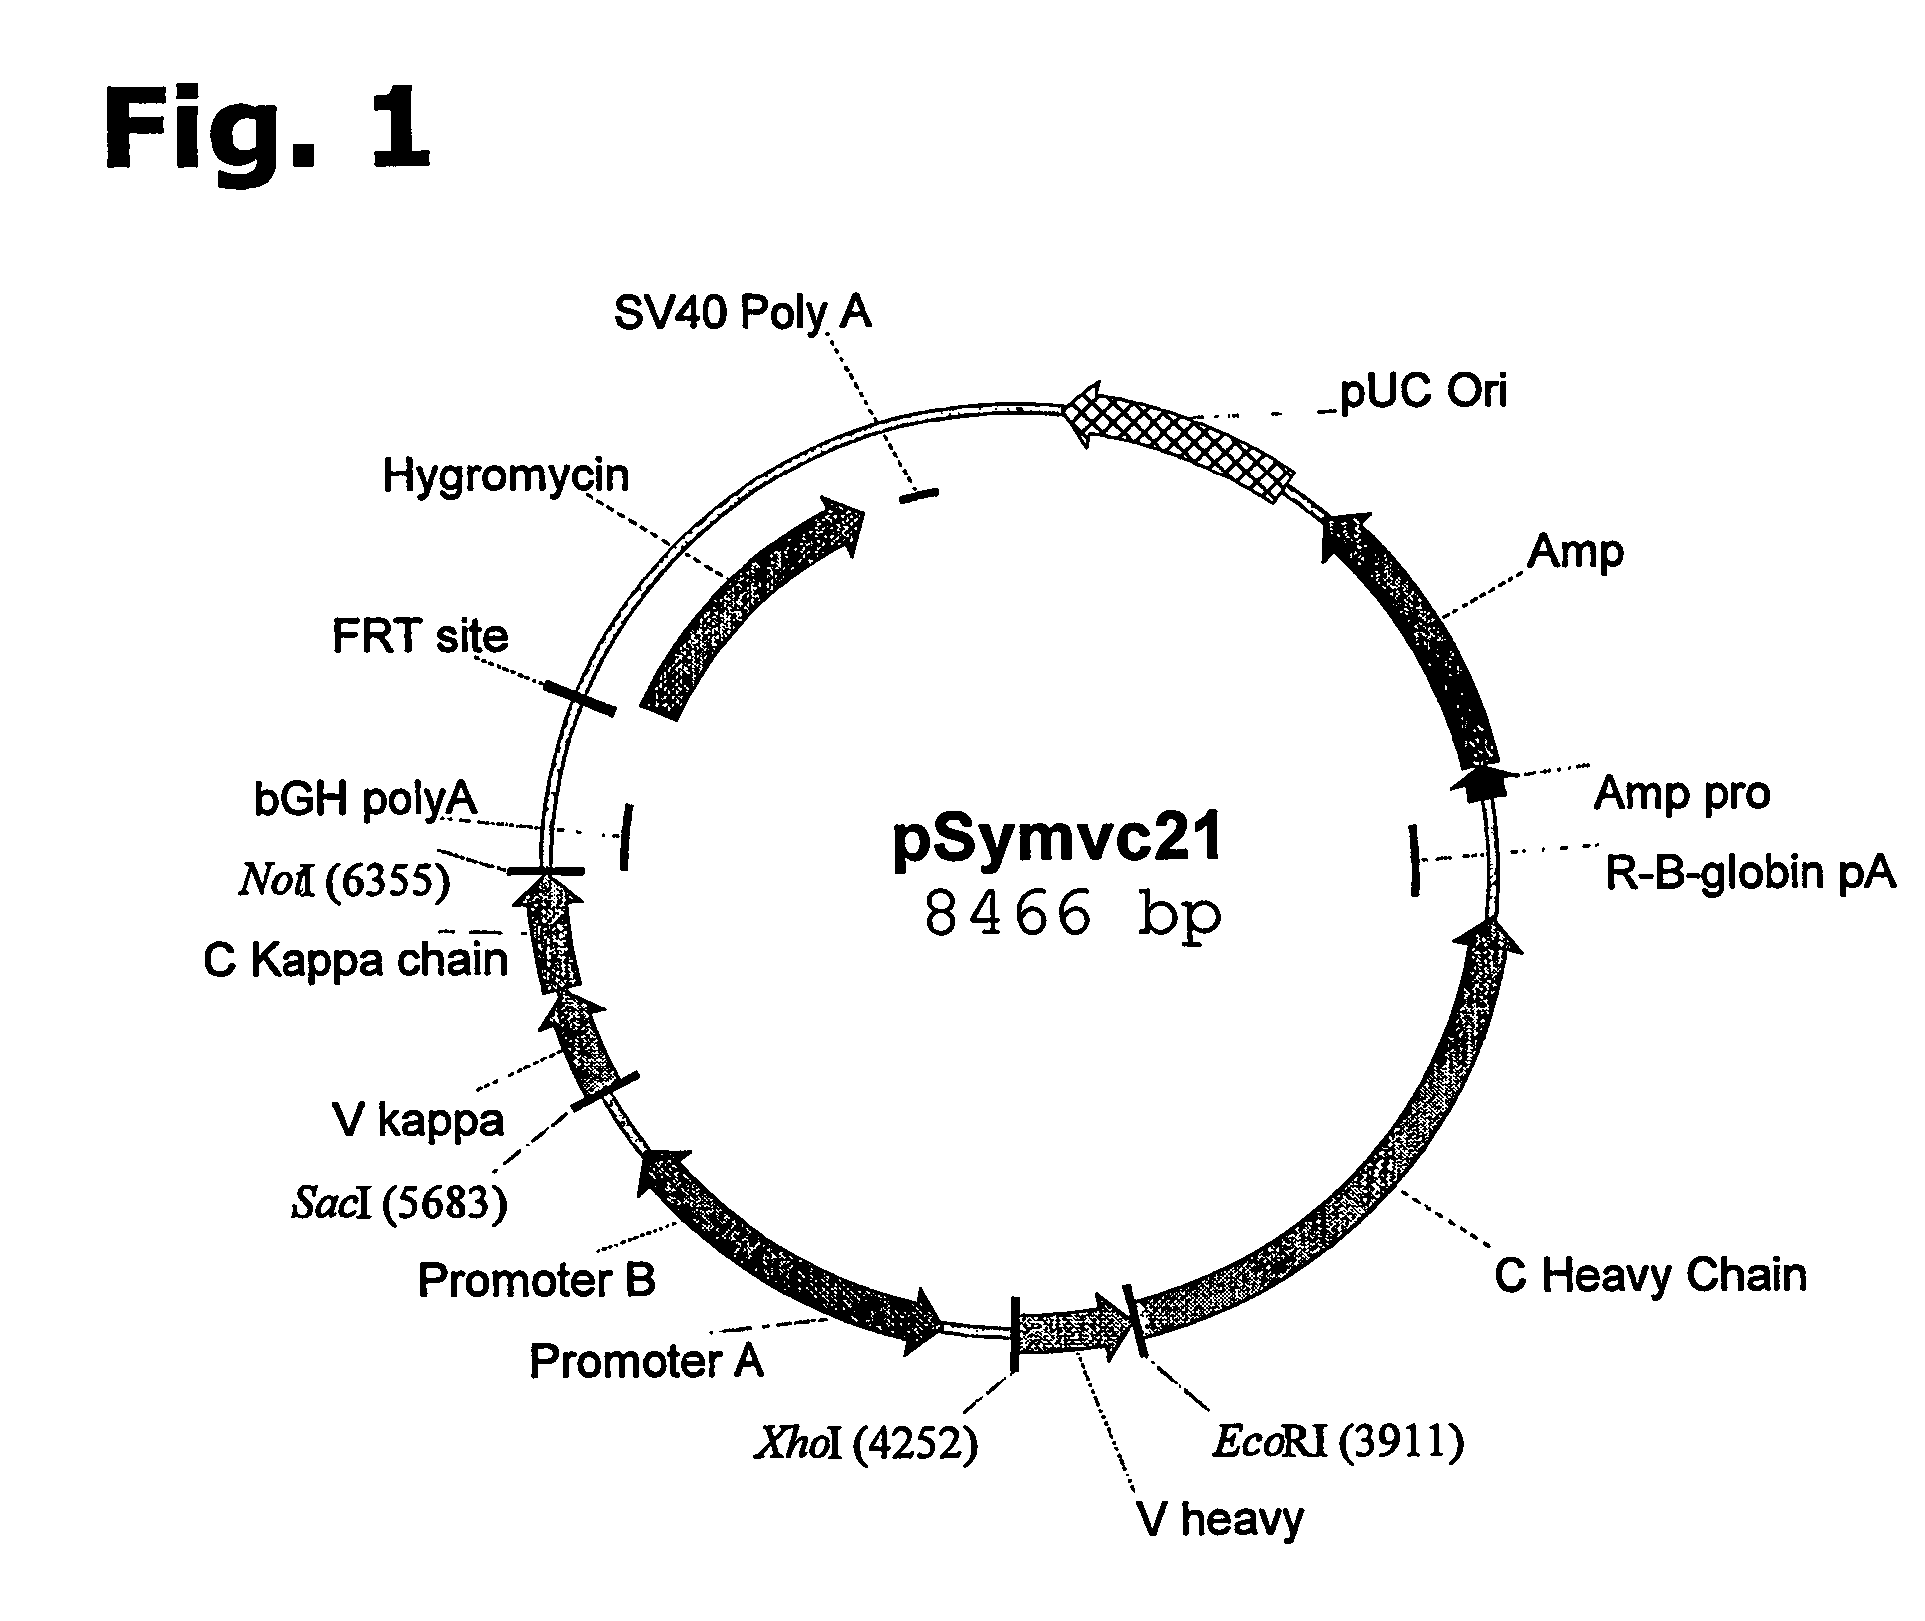 Method for manufacturing recombinant polyclonal proteins